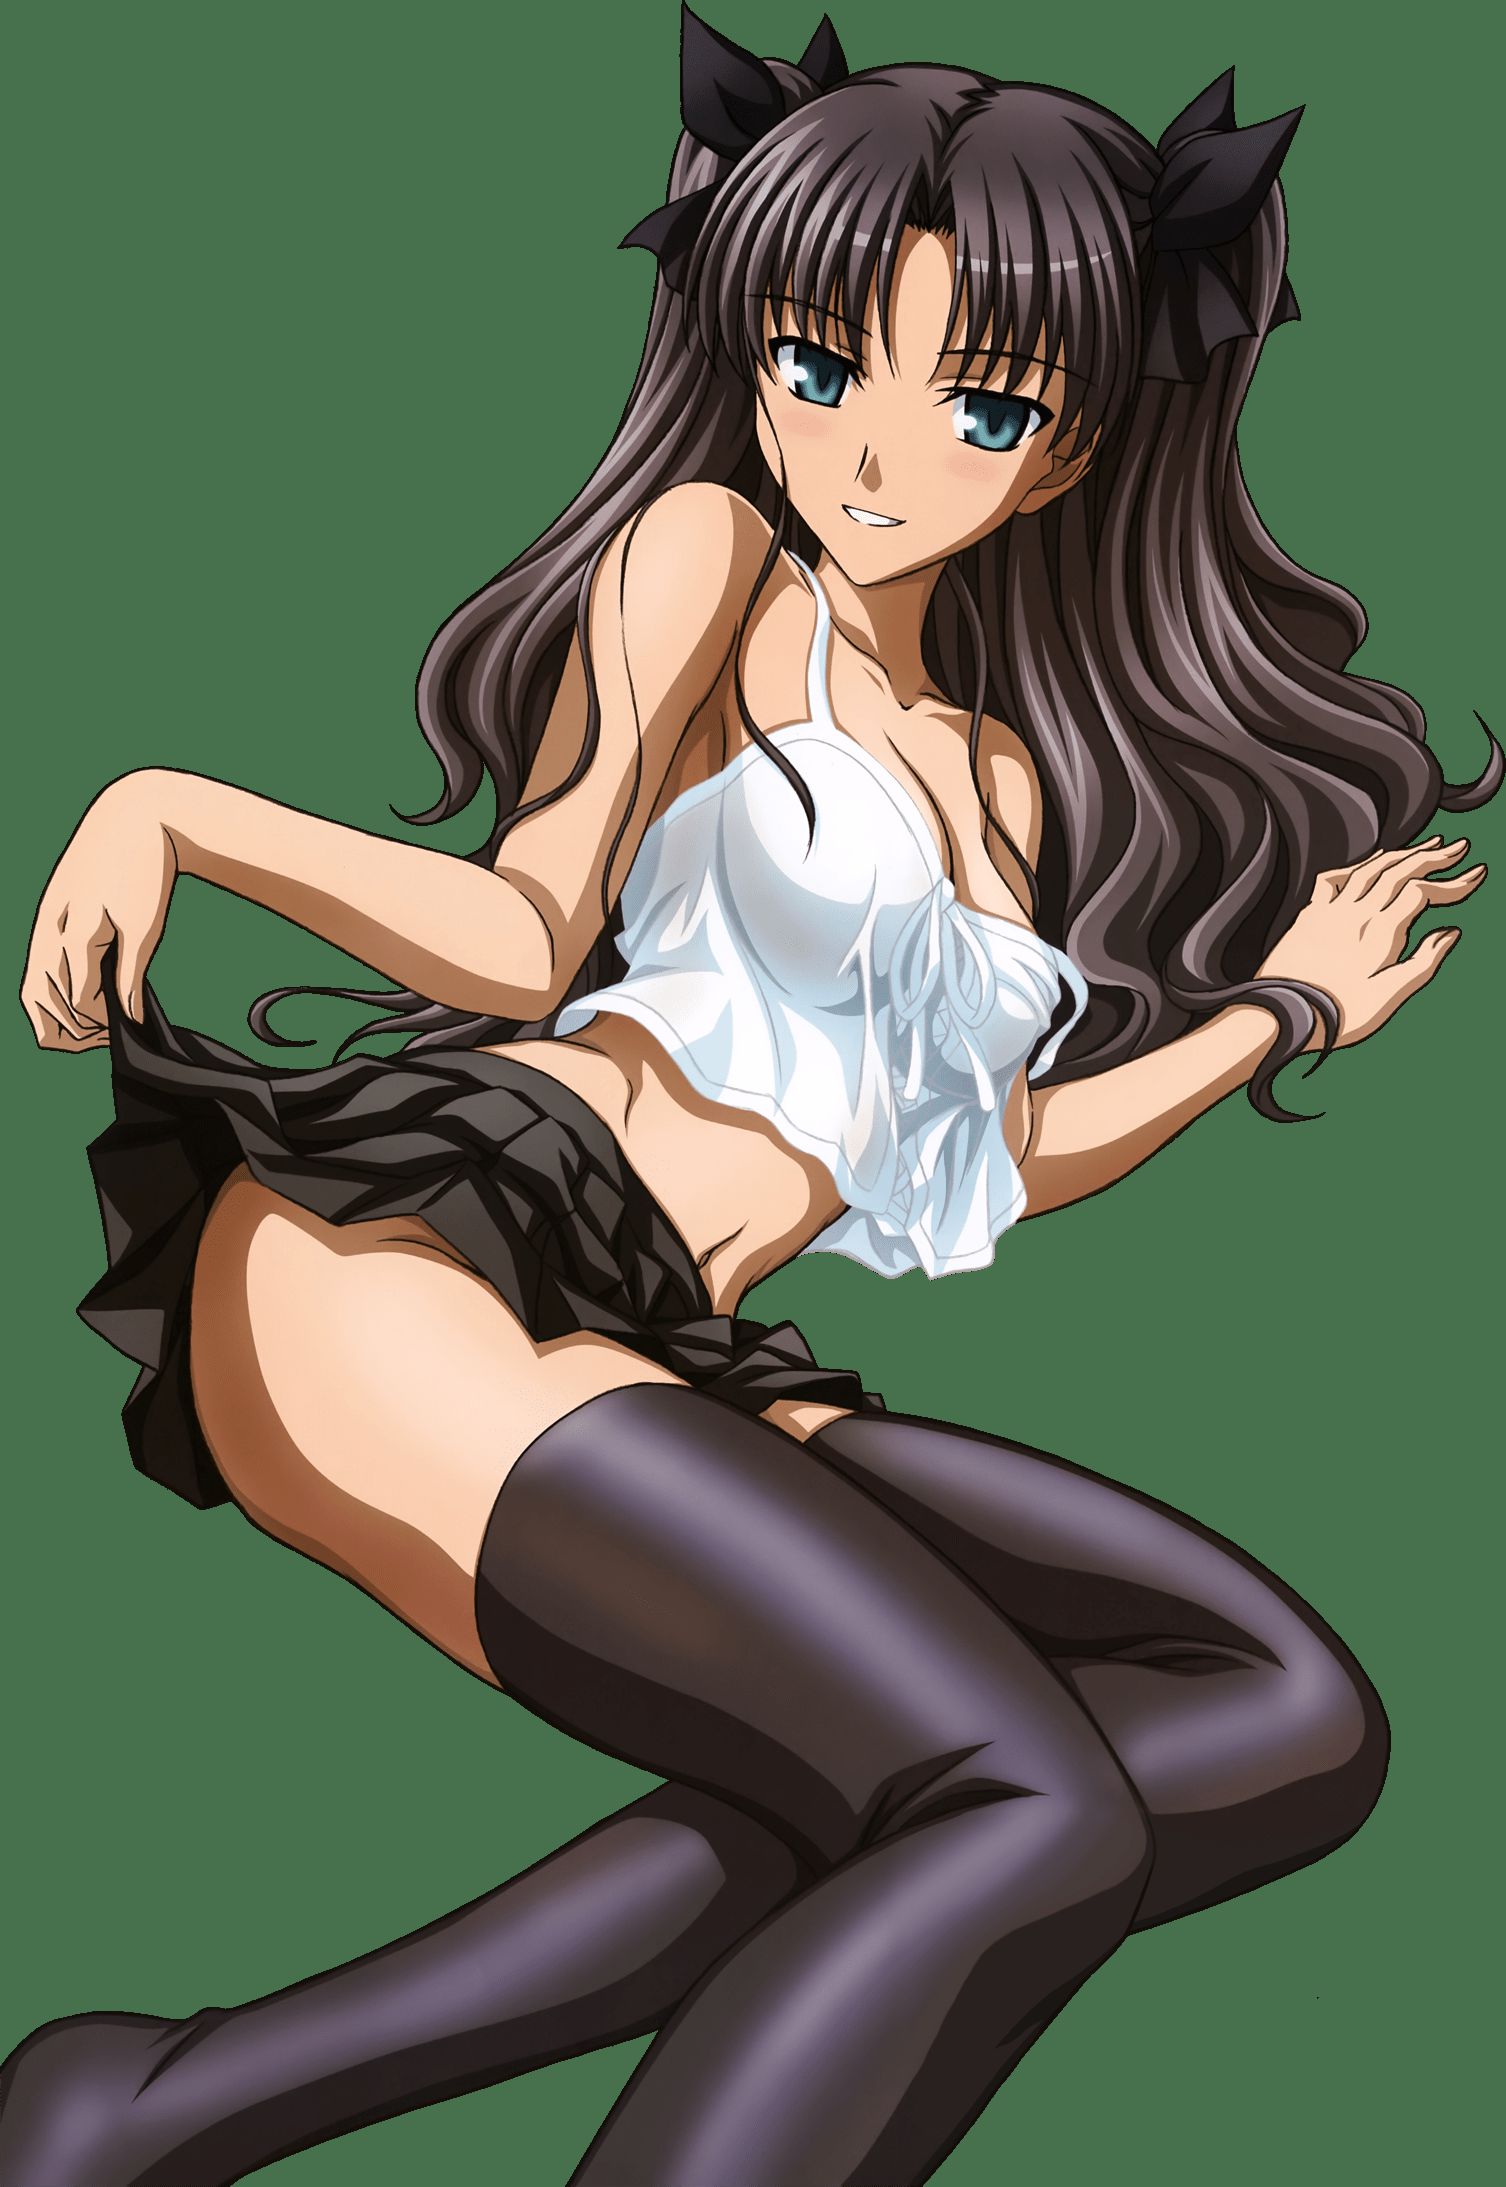 [Anime character material] png background erotic images of anime characters 86 30